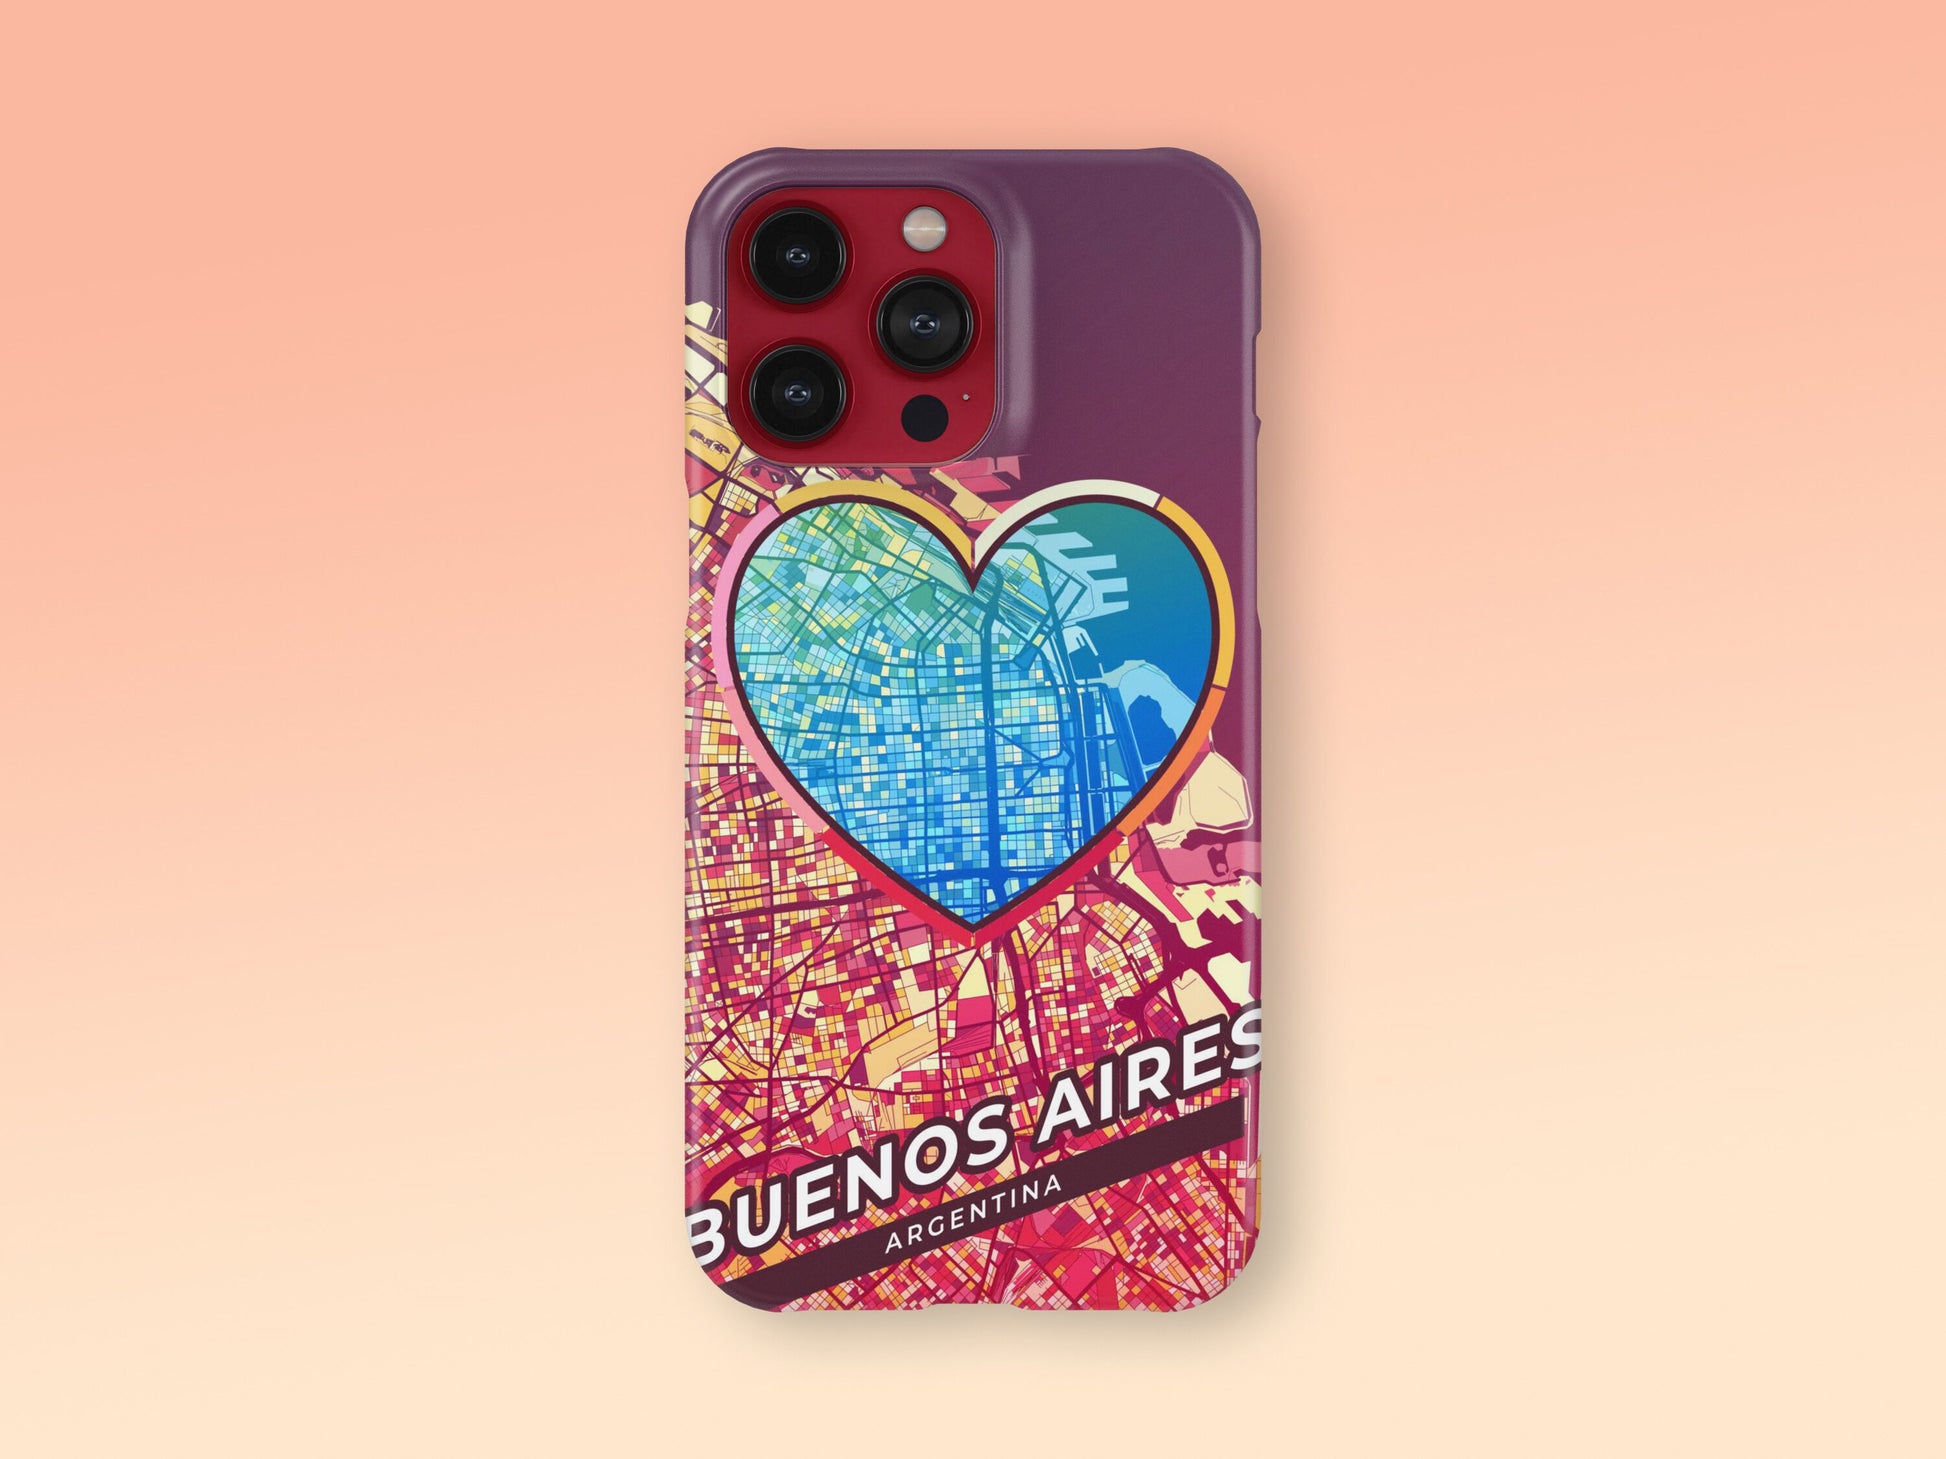 Buenos Aires Argentina slim phone case with colorful icon. Birthday, wedding or housewarming gift. Couple match cases. 2